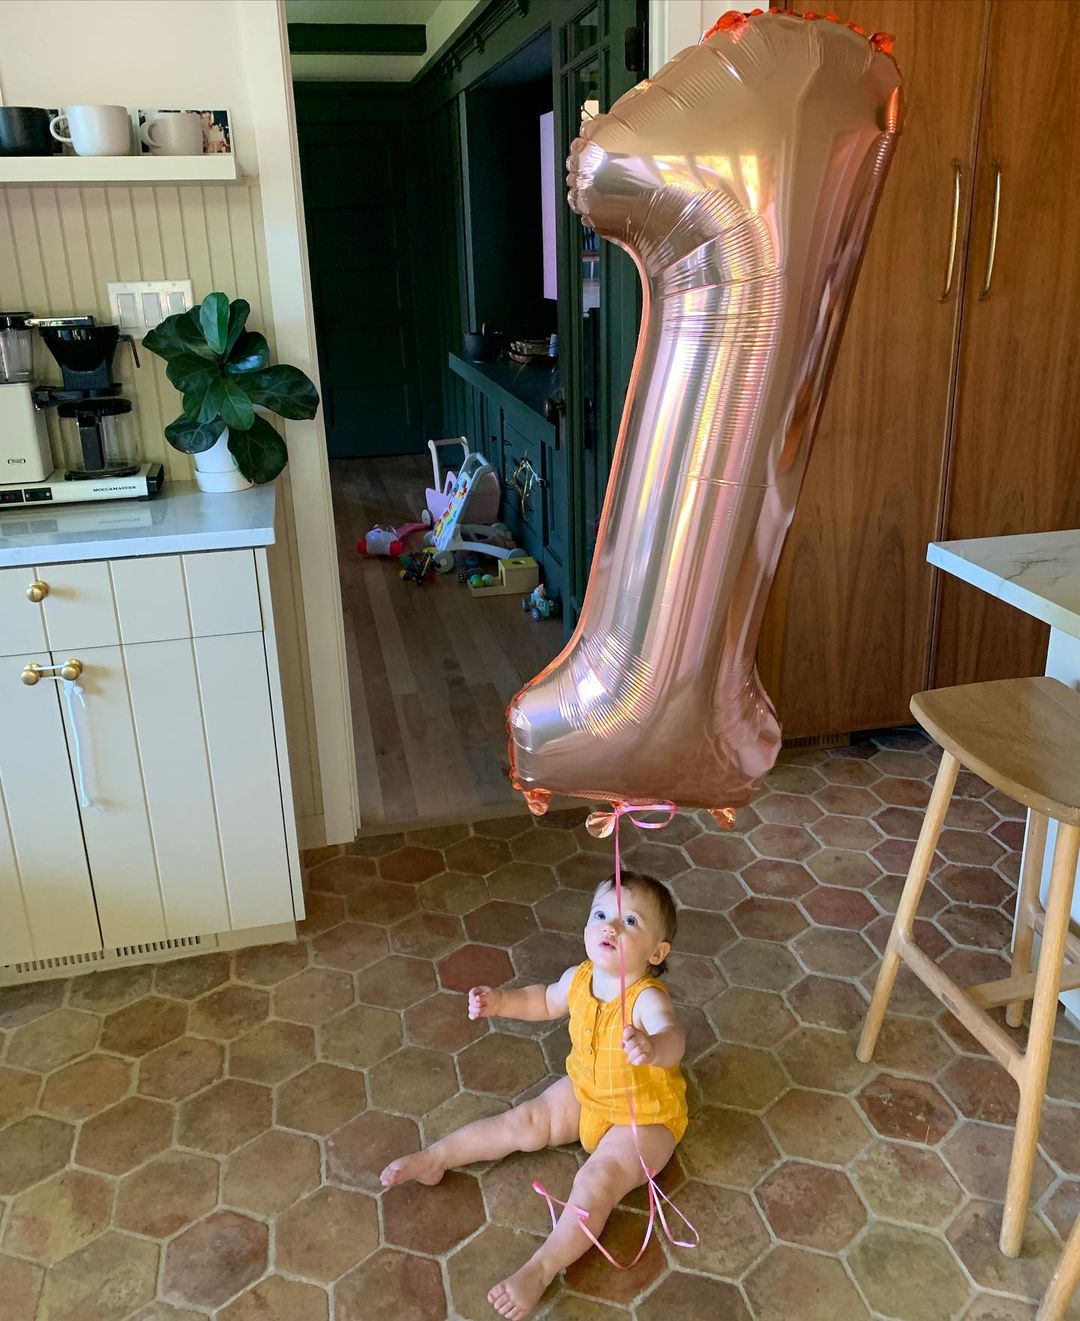 Kristen Hager's daughter turned one years old in July